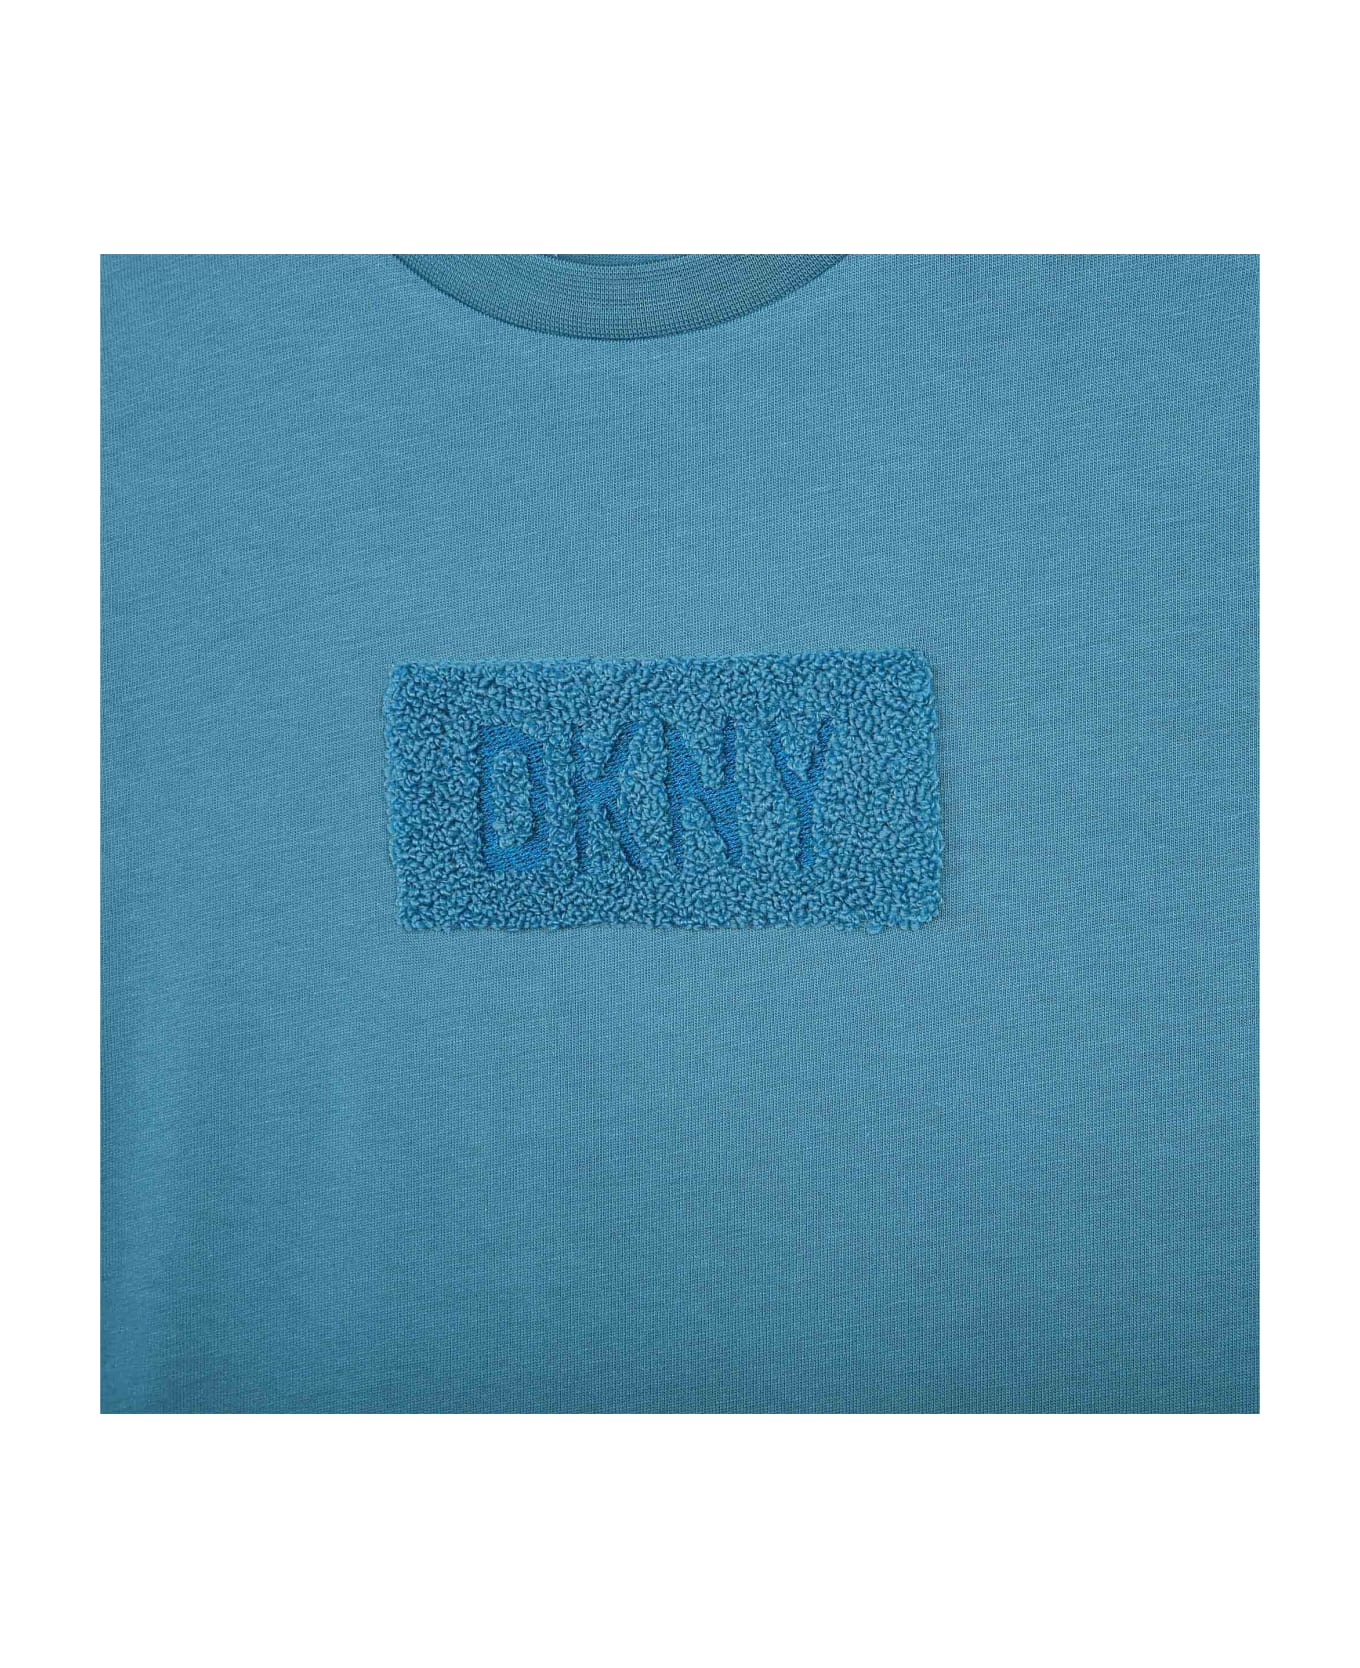 DKNY T-shirt With Application - Turchese